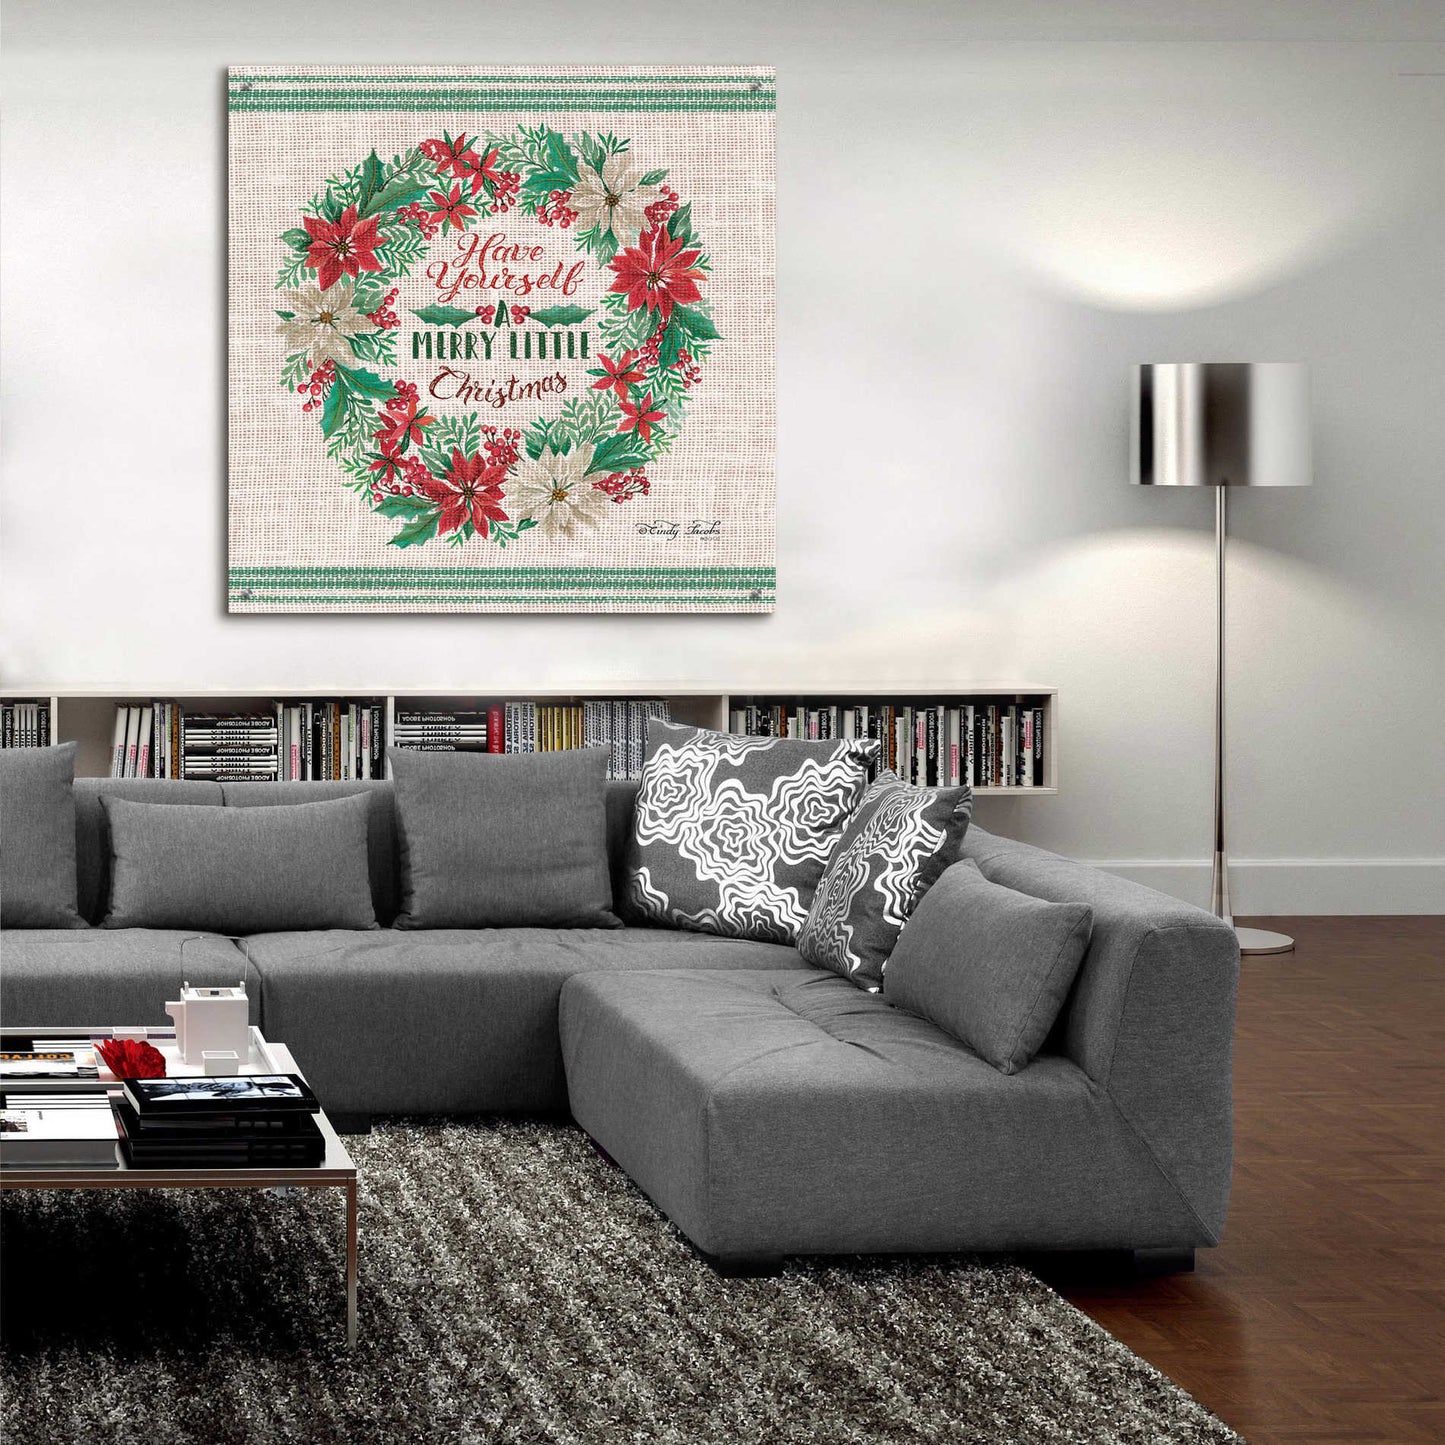 Epic Art 'Have Yourself a Merry Little Christmas Embroidery' by Cindy Jacobs, Acrylic Glass Wall Art,36x36